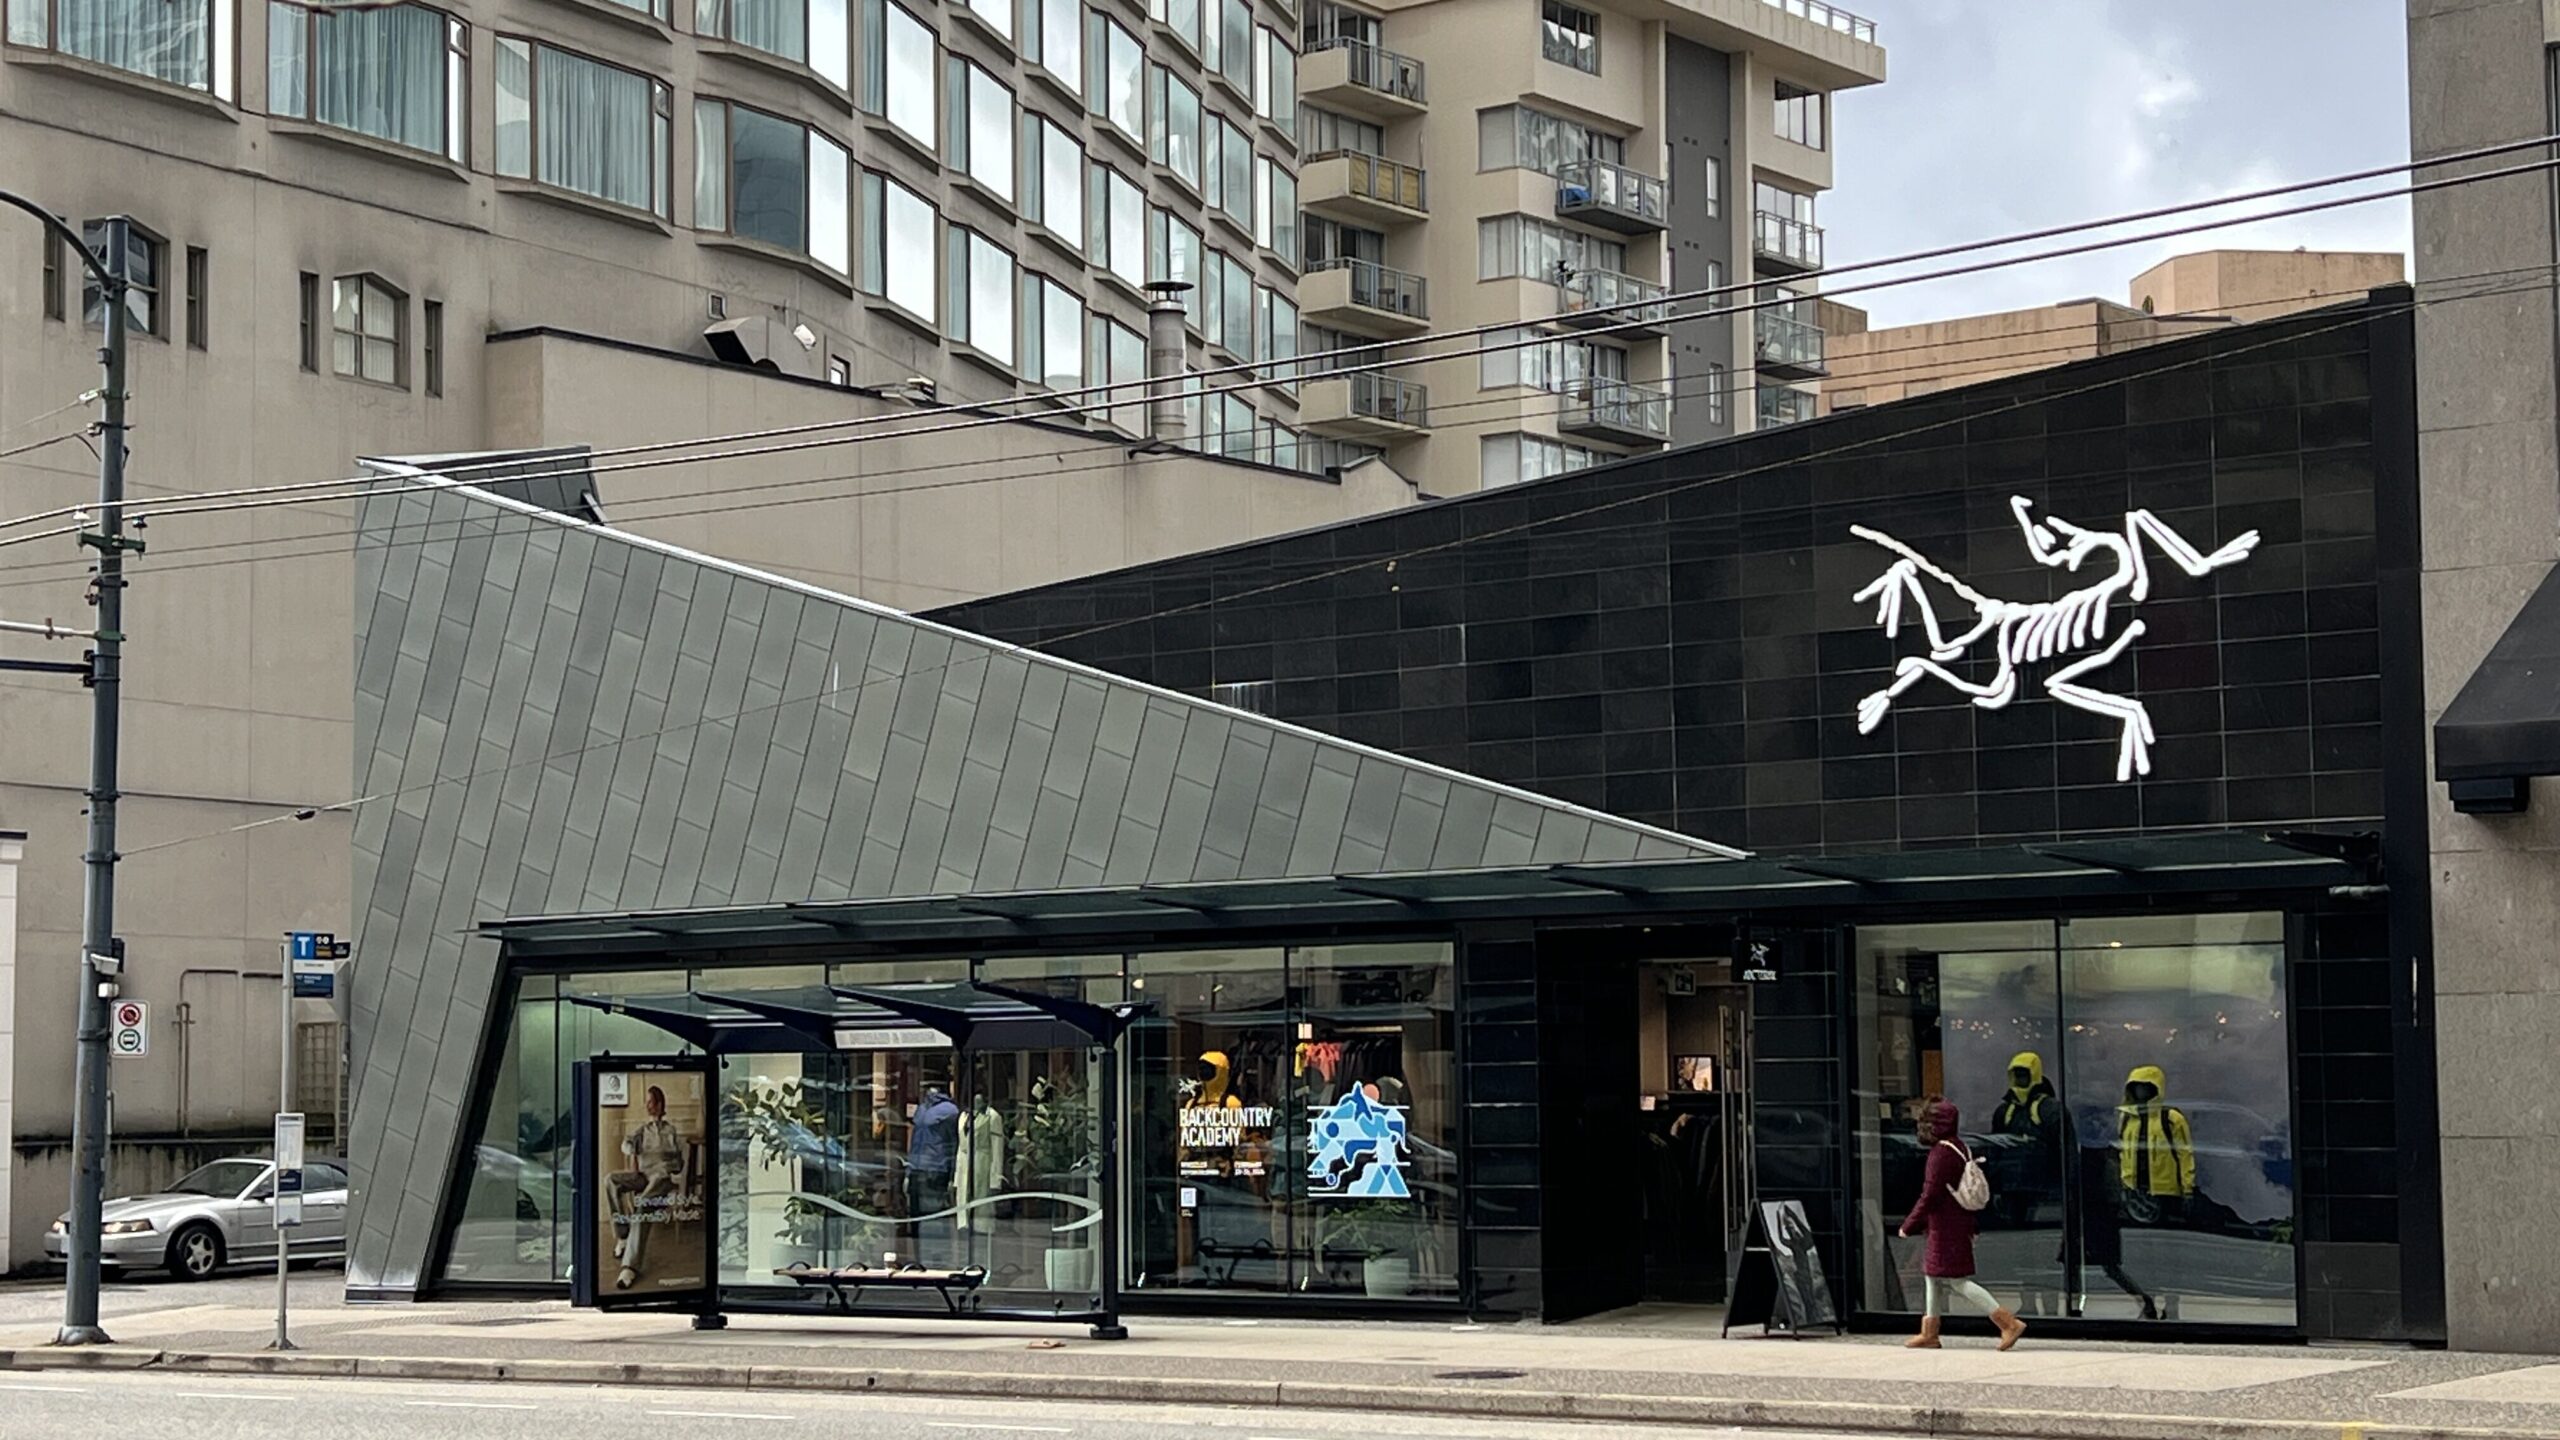 Vancouver Shopping: 3 New Store Openings #onRobson - Robson Street